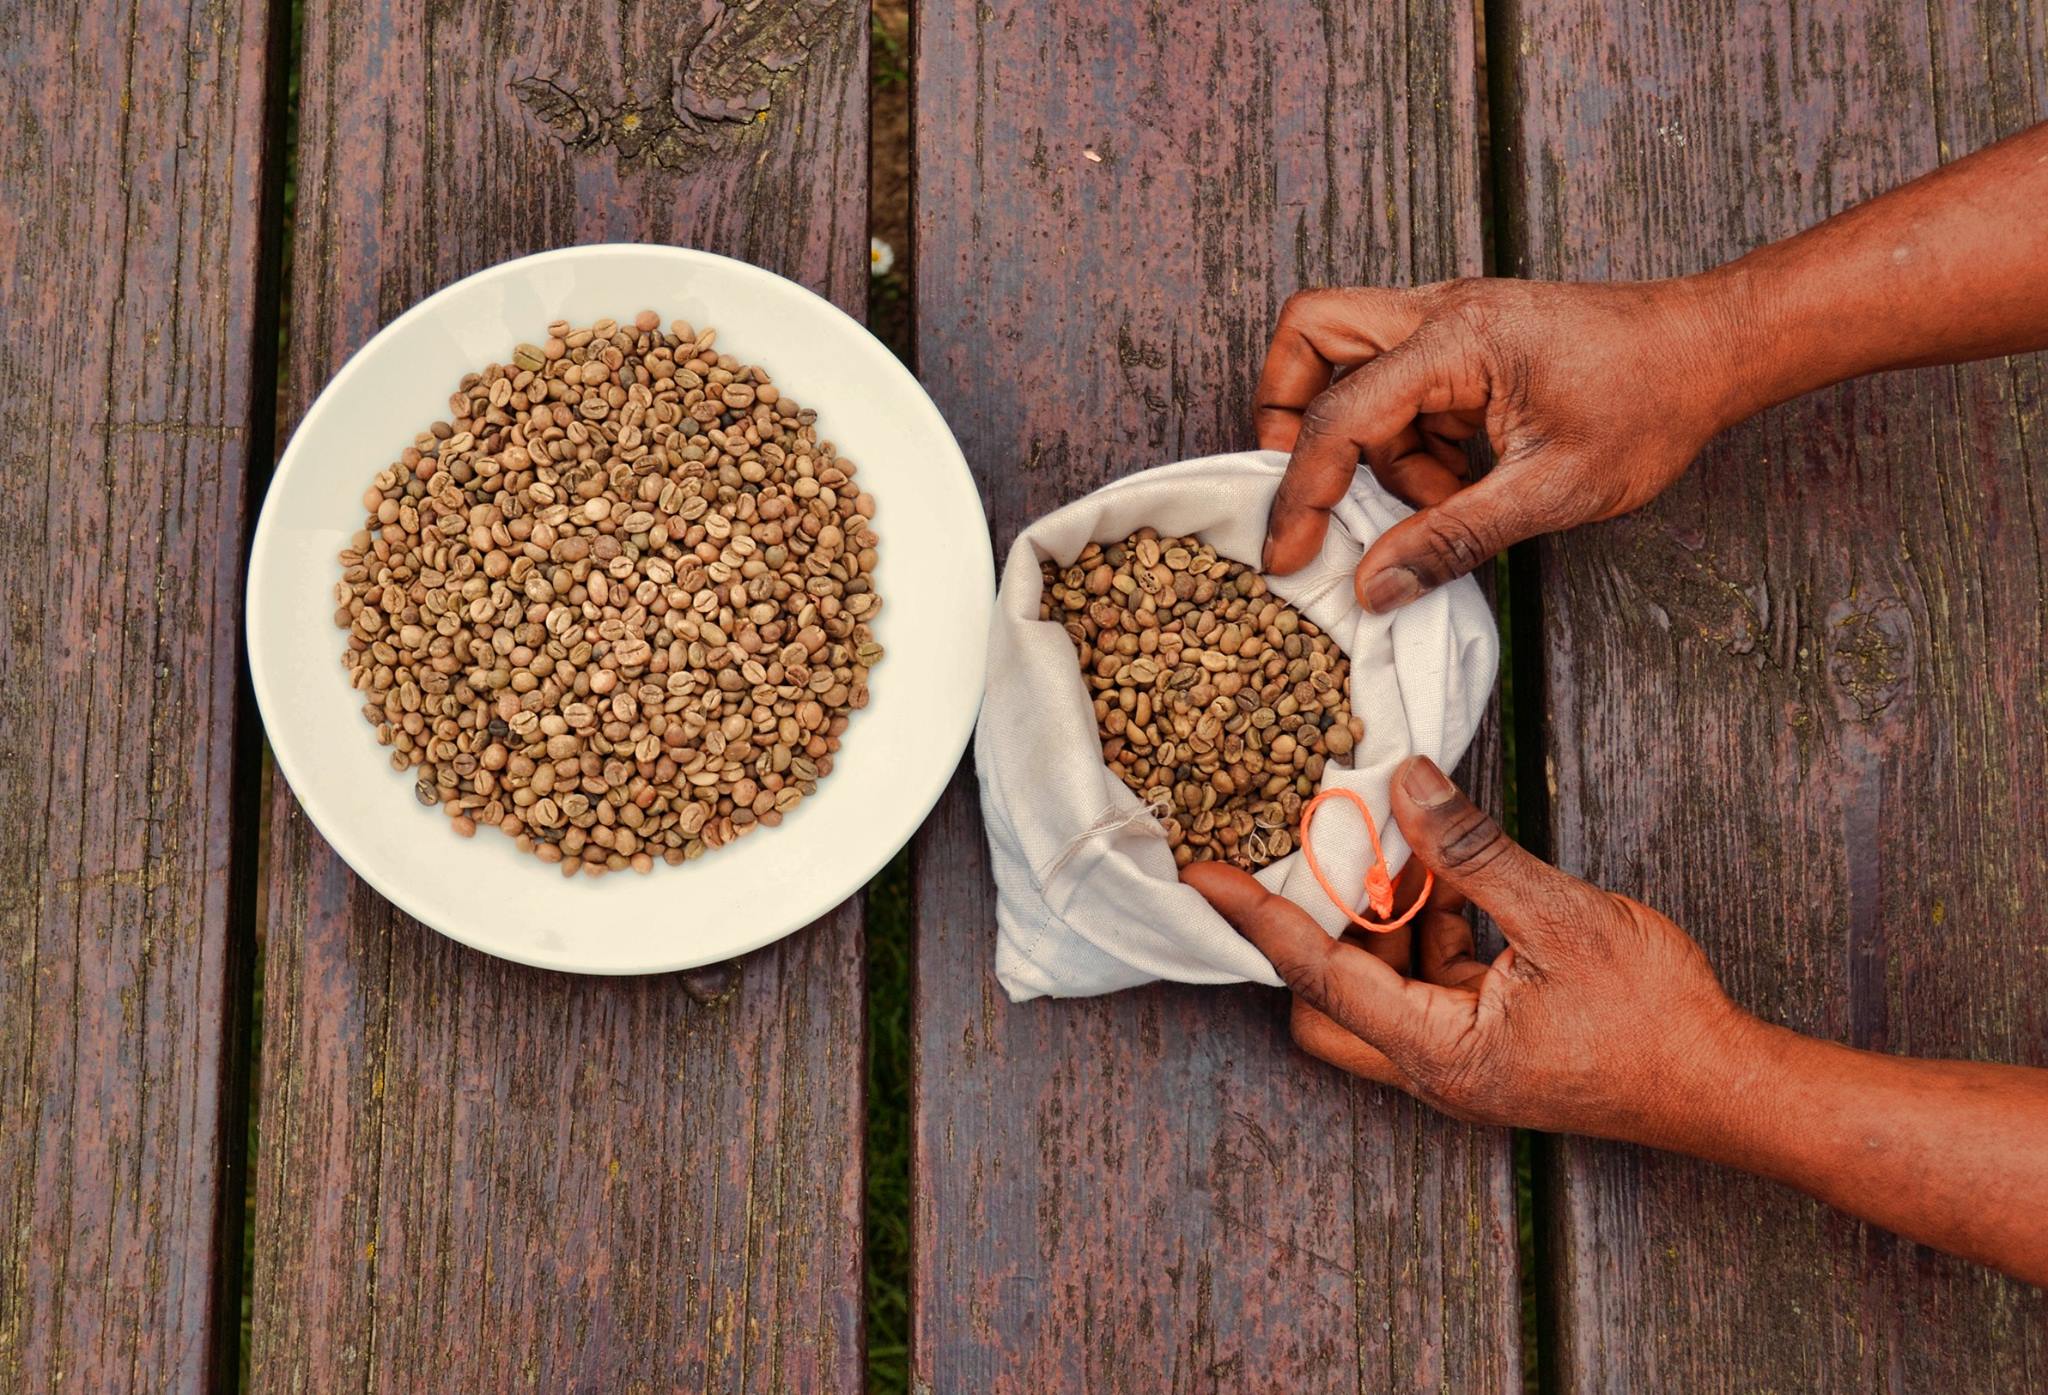 image of unroasted coffee beans southeast asia